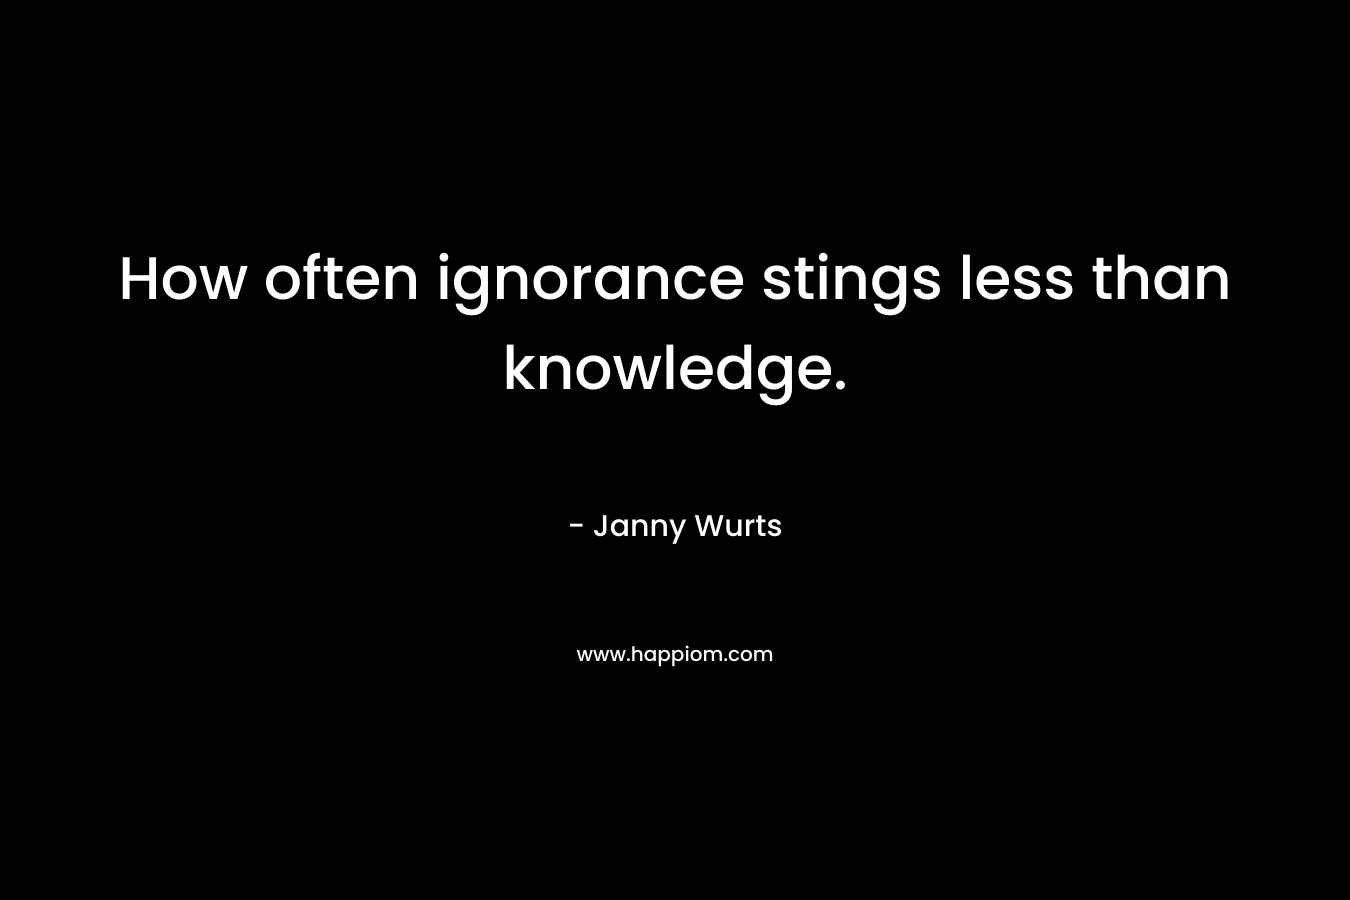 How often ignorance stings less than knowledge.